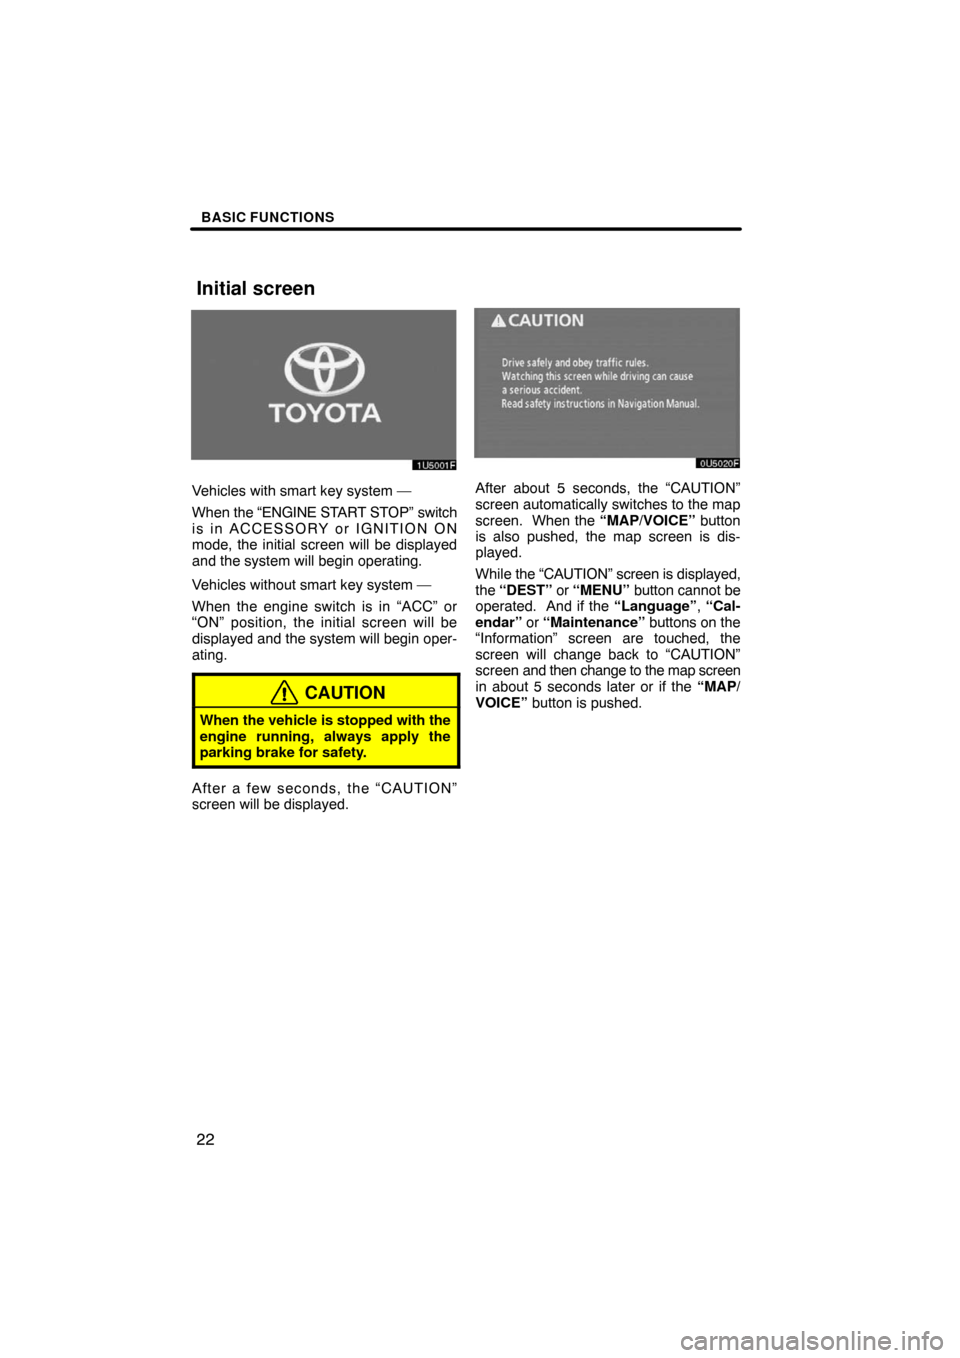 TOYOTA CAMRY 2008 XV40 / 8.G Navigation Manual BASIC FUNCTIONS
22
Vehicles with smart key system —
When the “ENGINE START STOP” switch
is in ACCESSORY or IGNITION ON
mode, the initial screen will be displayed
and the system will begin operat